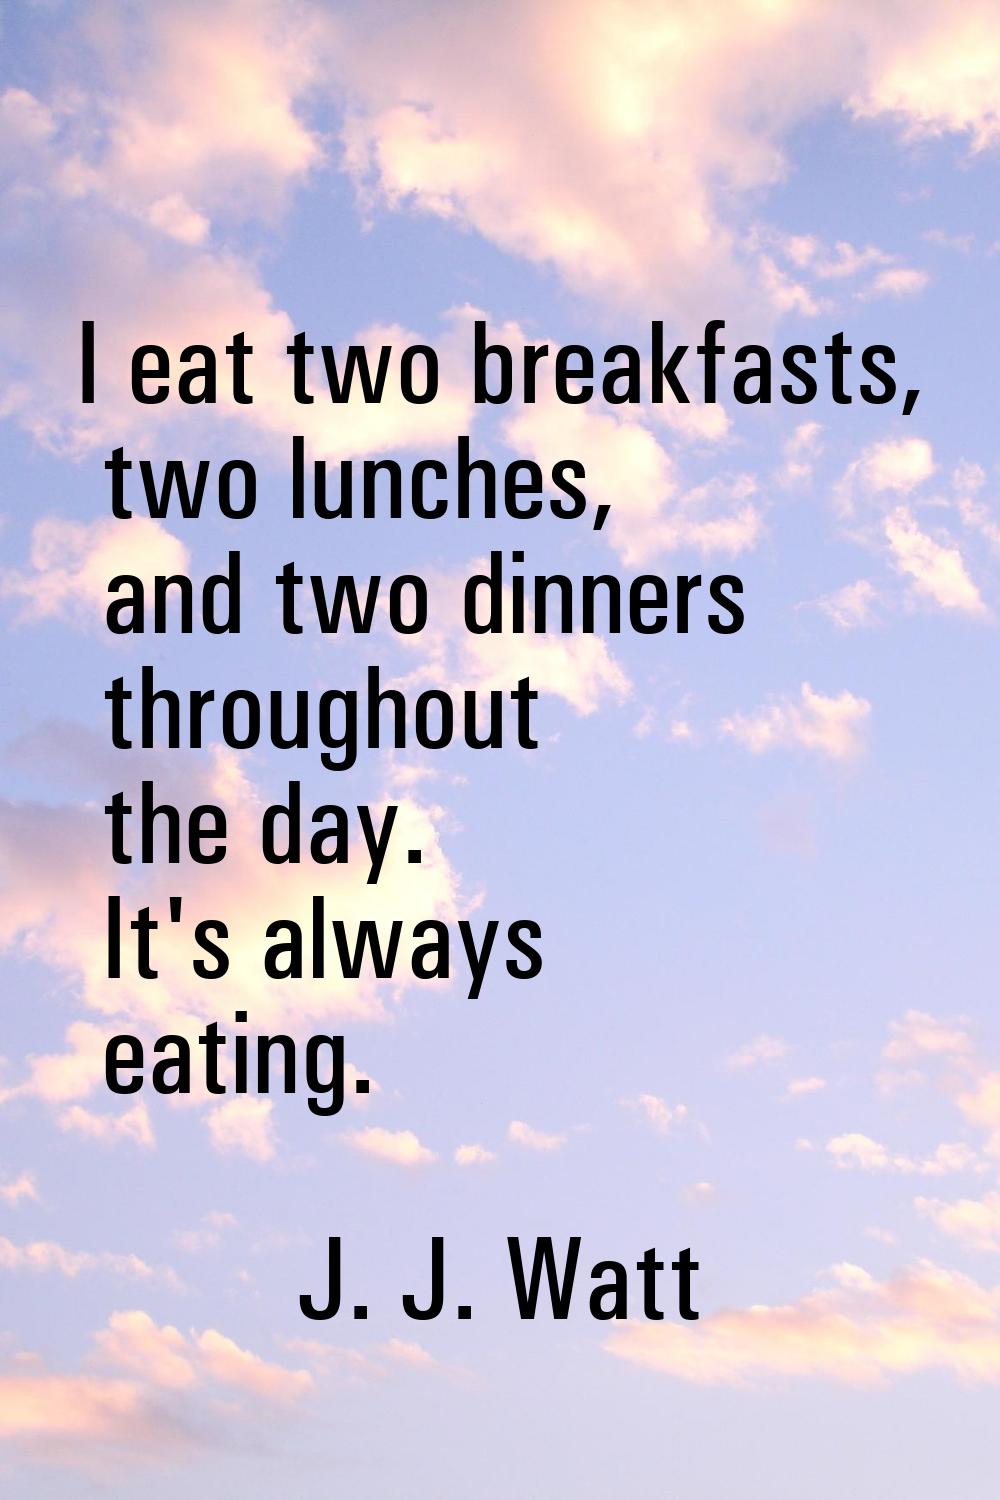 I eat two breakfasts, two lunches, and two dinners throughout the day. It's always eating.